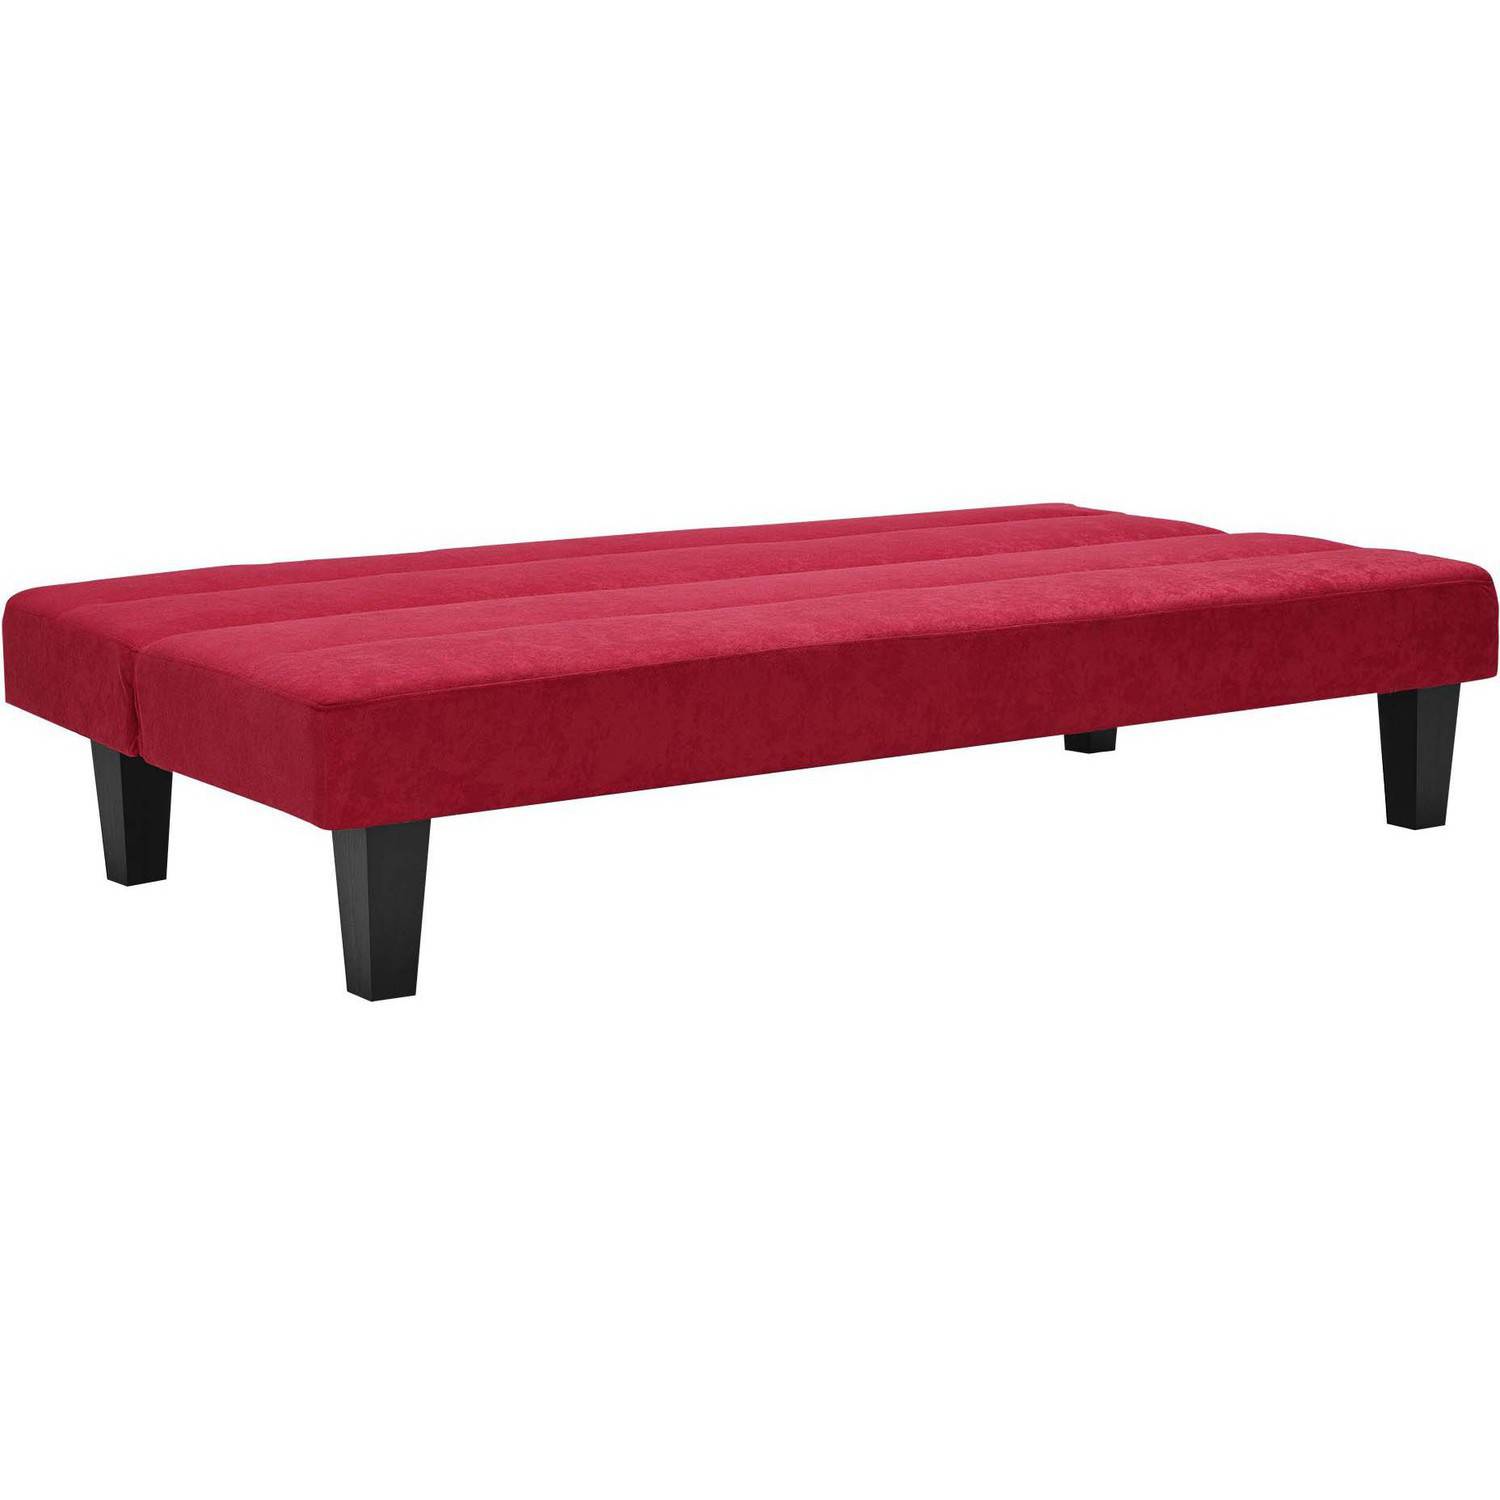 DHP Kebo Futon with Microfiber Cover, Red - image 13 of 13